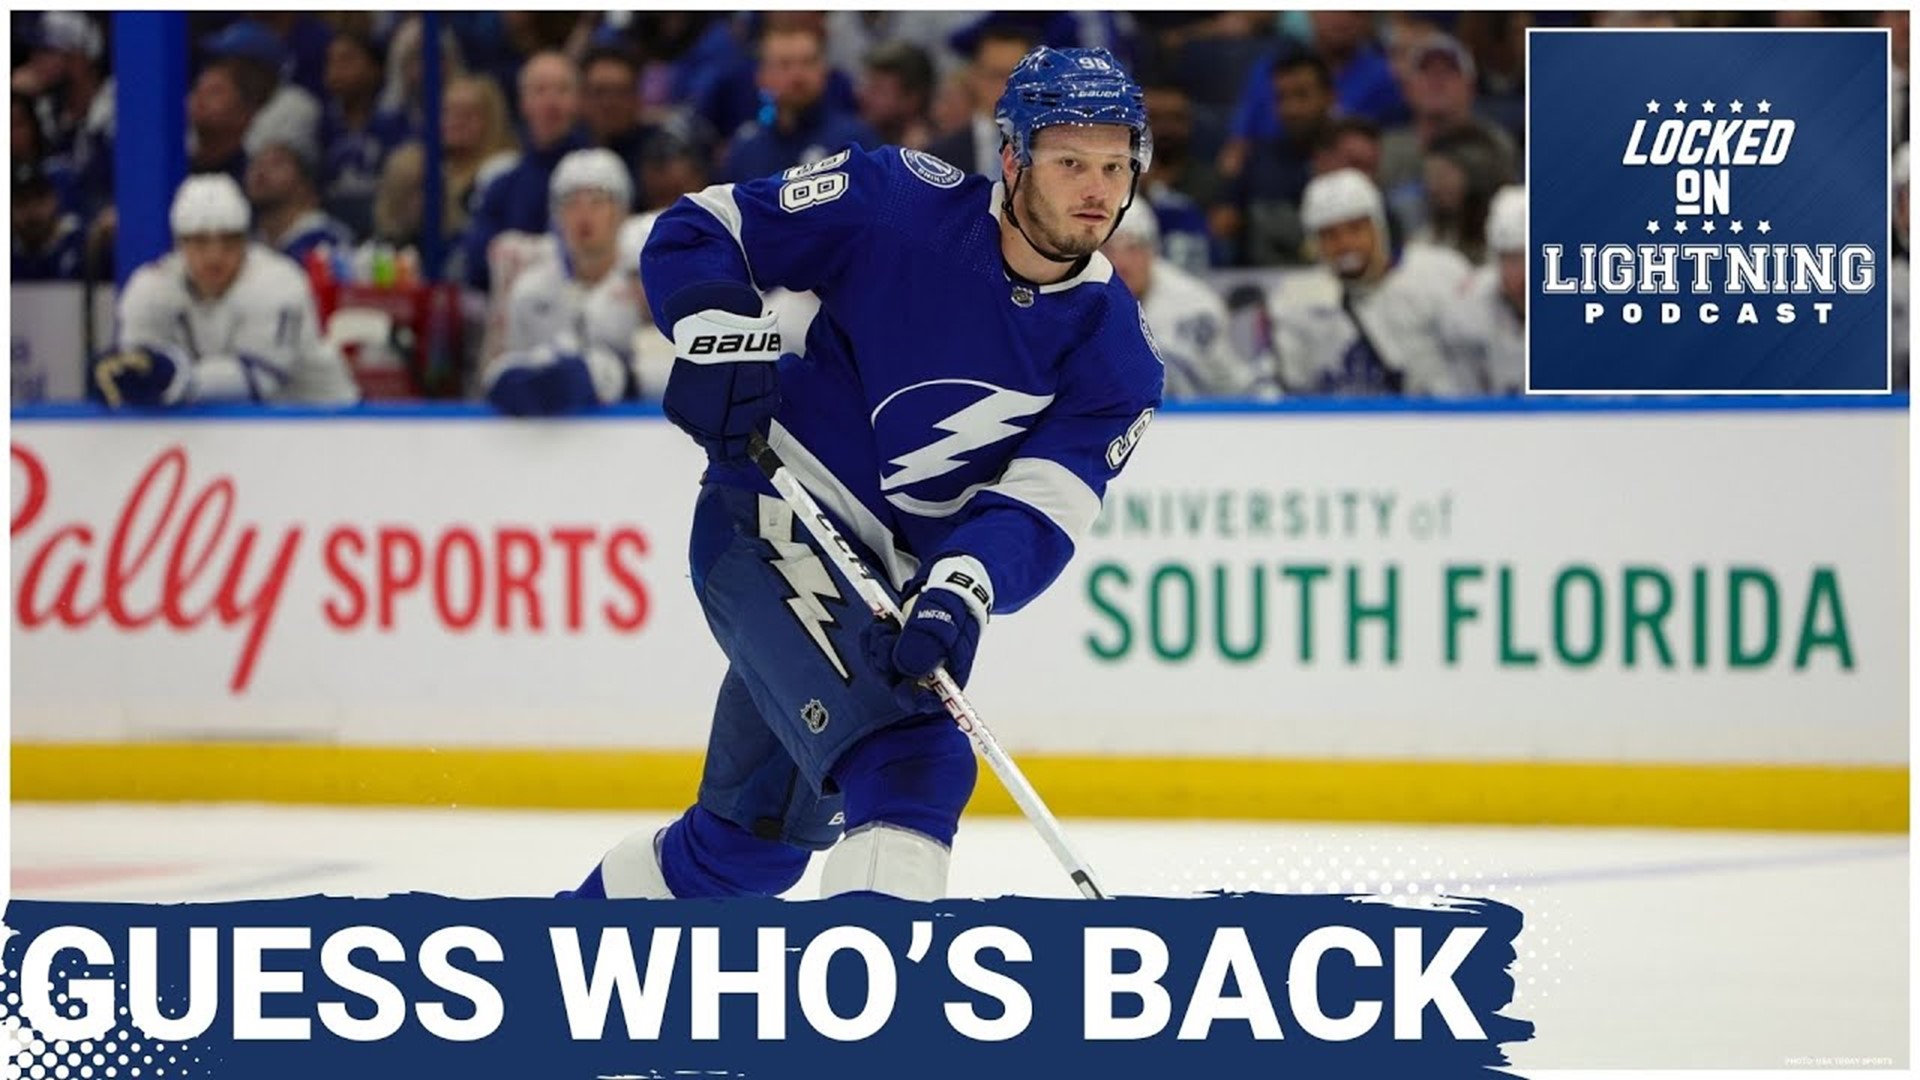 The Tampa Bay Lightning are set to make their return from the All-Star break and so are Eric Cernak and Mikhail Sergachev.